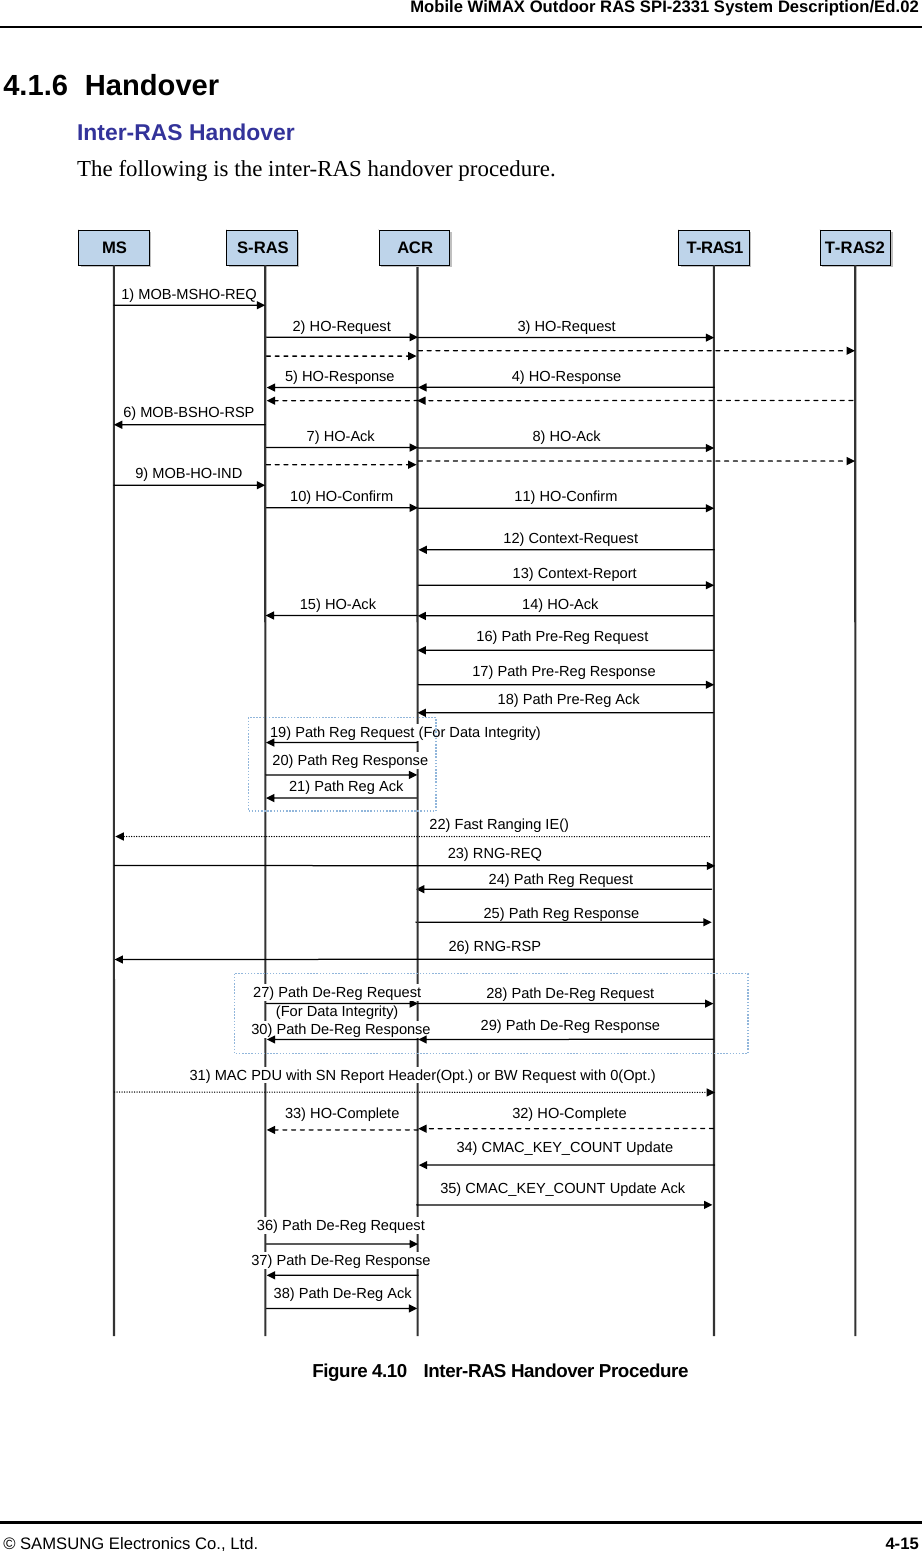   Mobile WiMAX Outdoor RAS SPI-2331 System Description/Ed.02 © SAMSUNG Electronics Co., Ltd.  4-15 4.1.6 Handover Inter-RAS Handover The following is the inter-RAS handover procedure.    Figure 4.10    Inter-RAS Handover Procedure 25) Path Reg Response 24) Path Reg Request 21) Path Reg Ack MS  S-RAS  T-RAS1  T-RAS21) MOB-MSHO-REQ ACR2) HO-Request  3) HO-Request 4) HO-Response5) HO-Response7) HO-Ack 9) MOB-HO-IND 10) HO-Confirm 12) Context-Request13) Context-Report14) HO-Ack 15) HO-Ack 23) RNG-REQ 26) RNG-RSP 31) MAC PDU with SN Report Header(Opt.) or BW Request with 0(Opt.) 32) HO-Complete 33) HO-Complete 36) Path De-Reg Request37) Path De-Reg Response6) MOB-BSHO-RSP 8) HO-Ack 11) HO-Confirm 16) Path Pre-Reg Request19) Path Reg Request (For Data Integrity)20) Path Reg Response 17) Path Pre-Reg Response18) Path Pre-Reg Ack 27) Path De-Reg Request   (For Data Integrity)  30) Path De-Reg Response28) Path De-Reg Request29) Path De-Reg Response22) Fast Ranging IE() 34) CMAC_KEY_COUNT Update35) CMAC_KEY_COUNT Update Ack 38) Path De-Reg Ack 